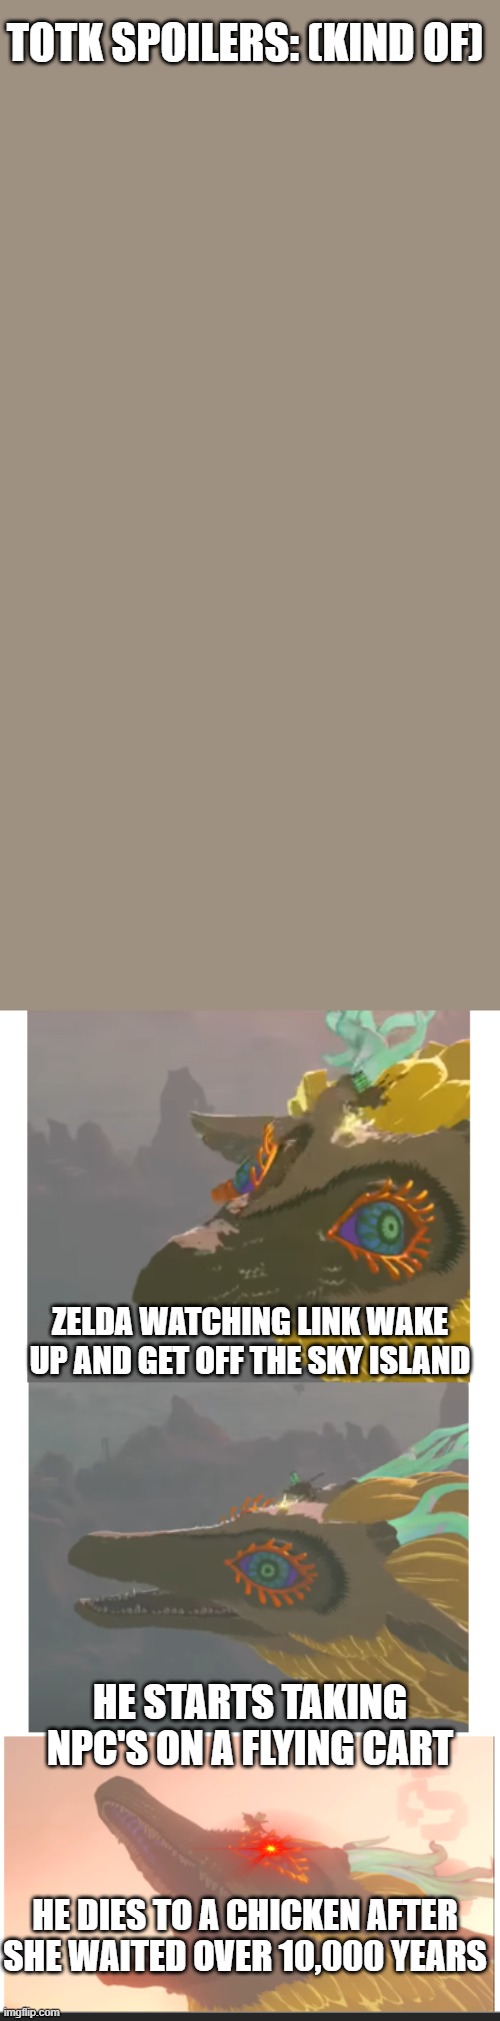 bad pun light dragon | TOTK SPOILERS: (KIND OF); ZELDA WATCHING LINK WAKE UP AND GET OFF THE SKY ISLAND; HE STARTS TAKING NPC'S ON A FLYING CART; HE DIES TO A CHICKEN AFTER SHE WAITED OVER 10,000 YEARS | image tagged in bad pun light dragon | made w/ Imgflip meme maker